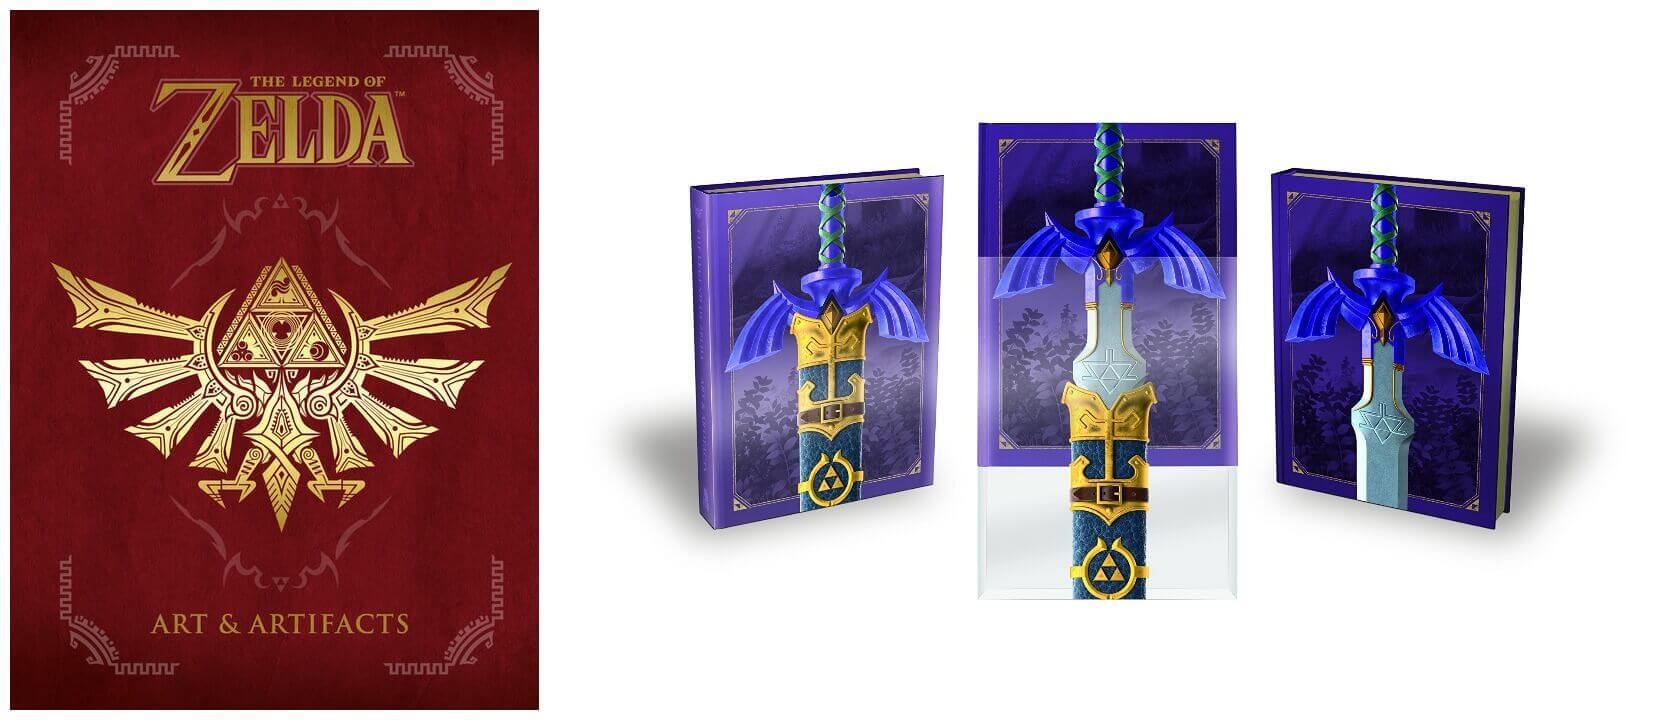 February 2017 Manga Releases Covers of The Legend of Zelda Art & Artifacts and Art & Artifacts Limited Edition.